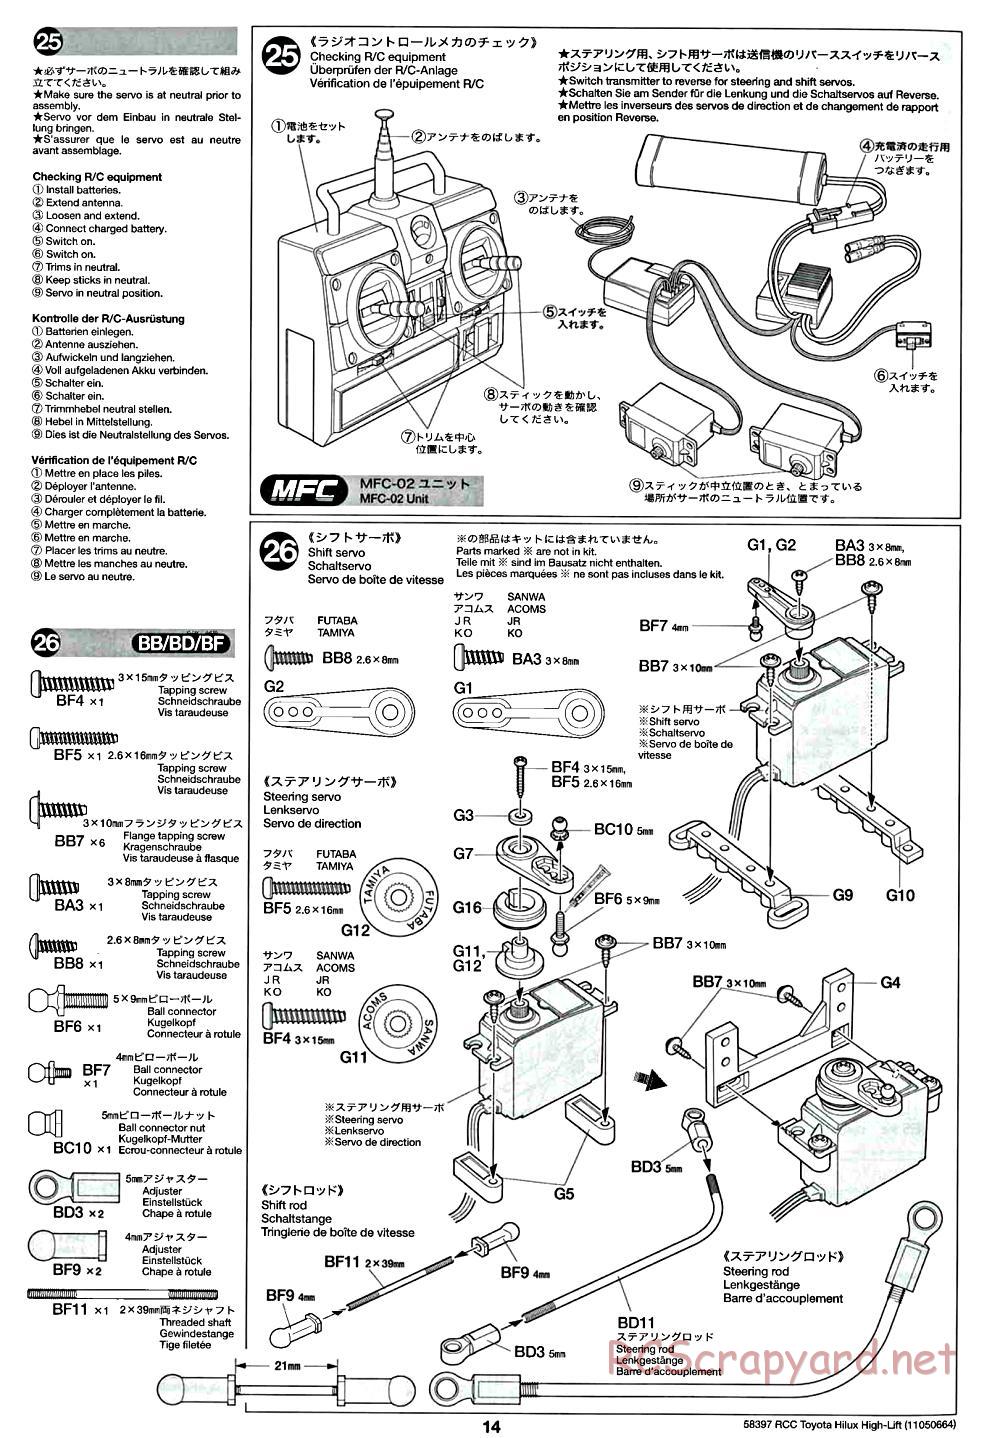 Tamiya - Toyota Hilux High-Lift Chassis - Manual - Page 14